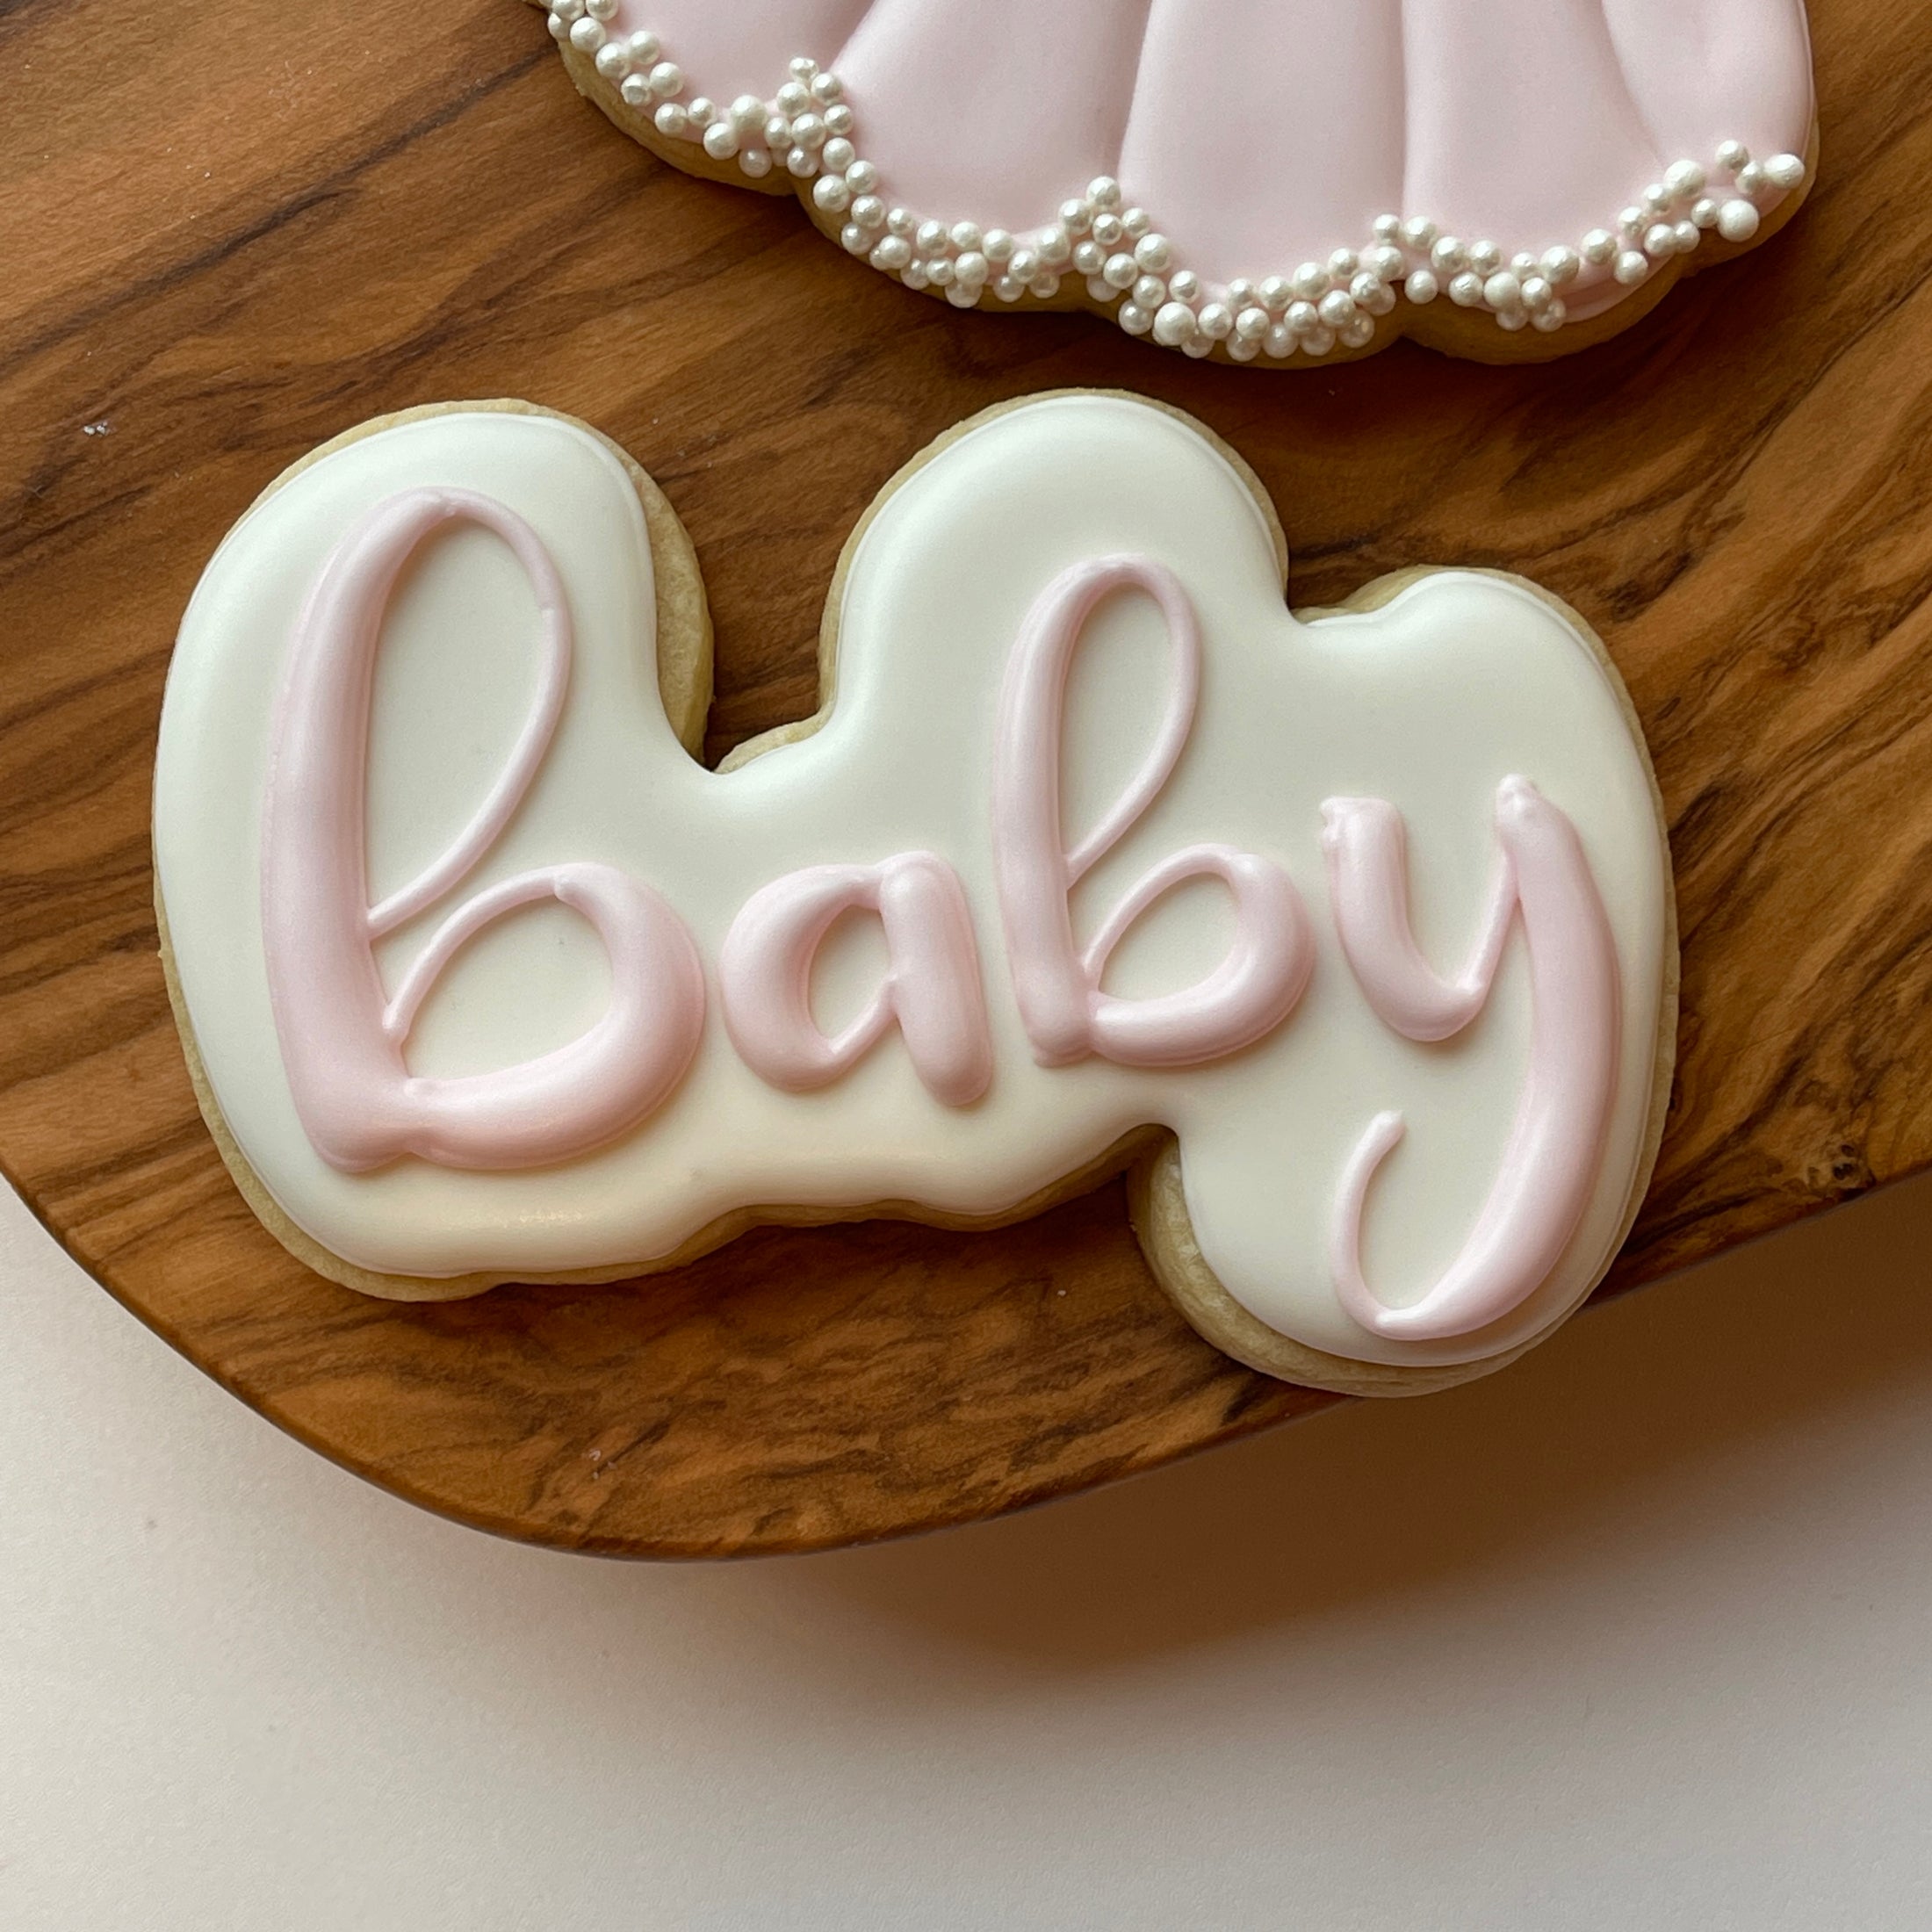 Baby word plaque cookie cutter